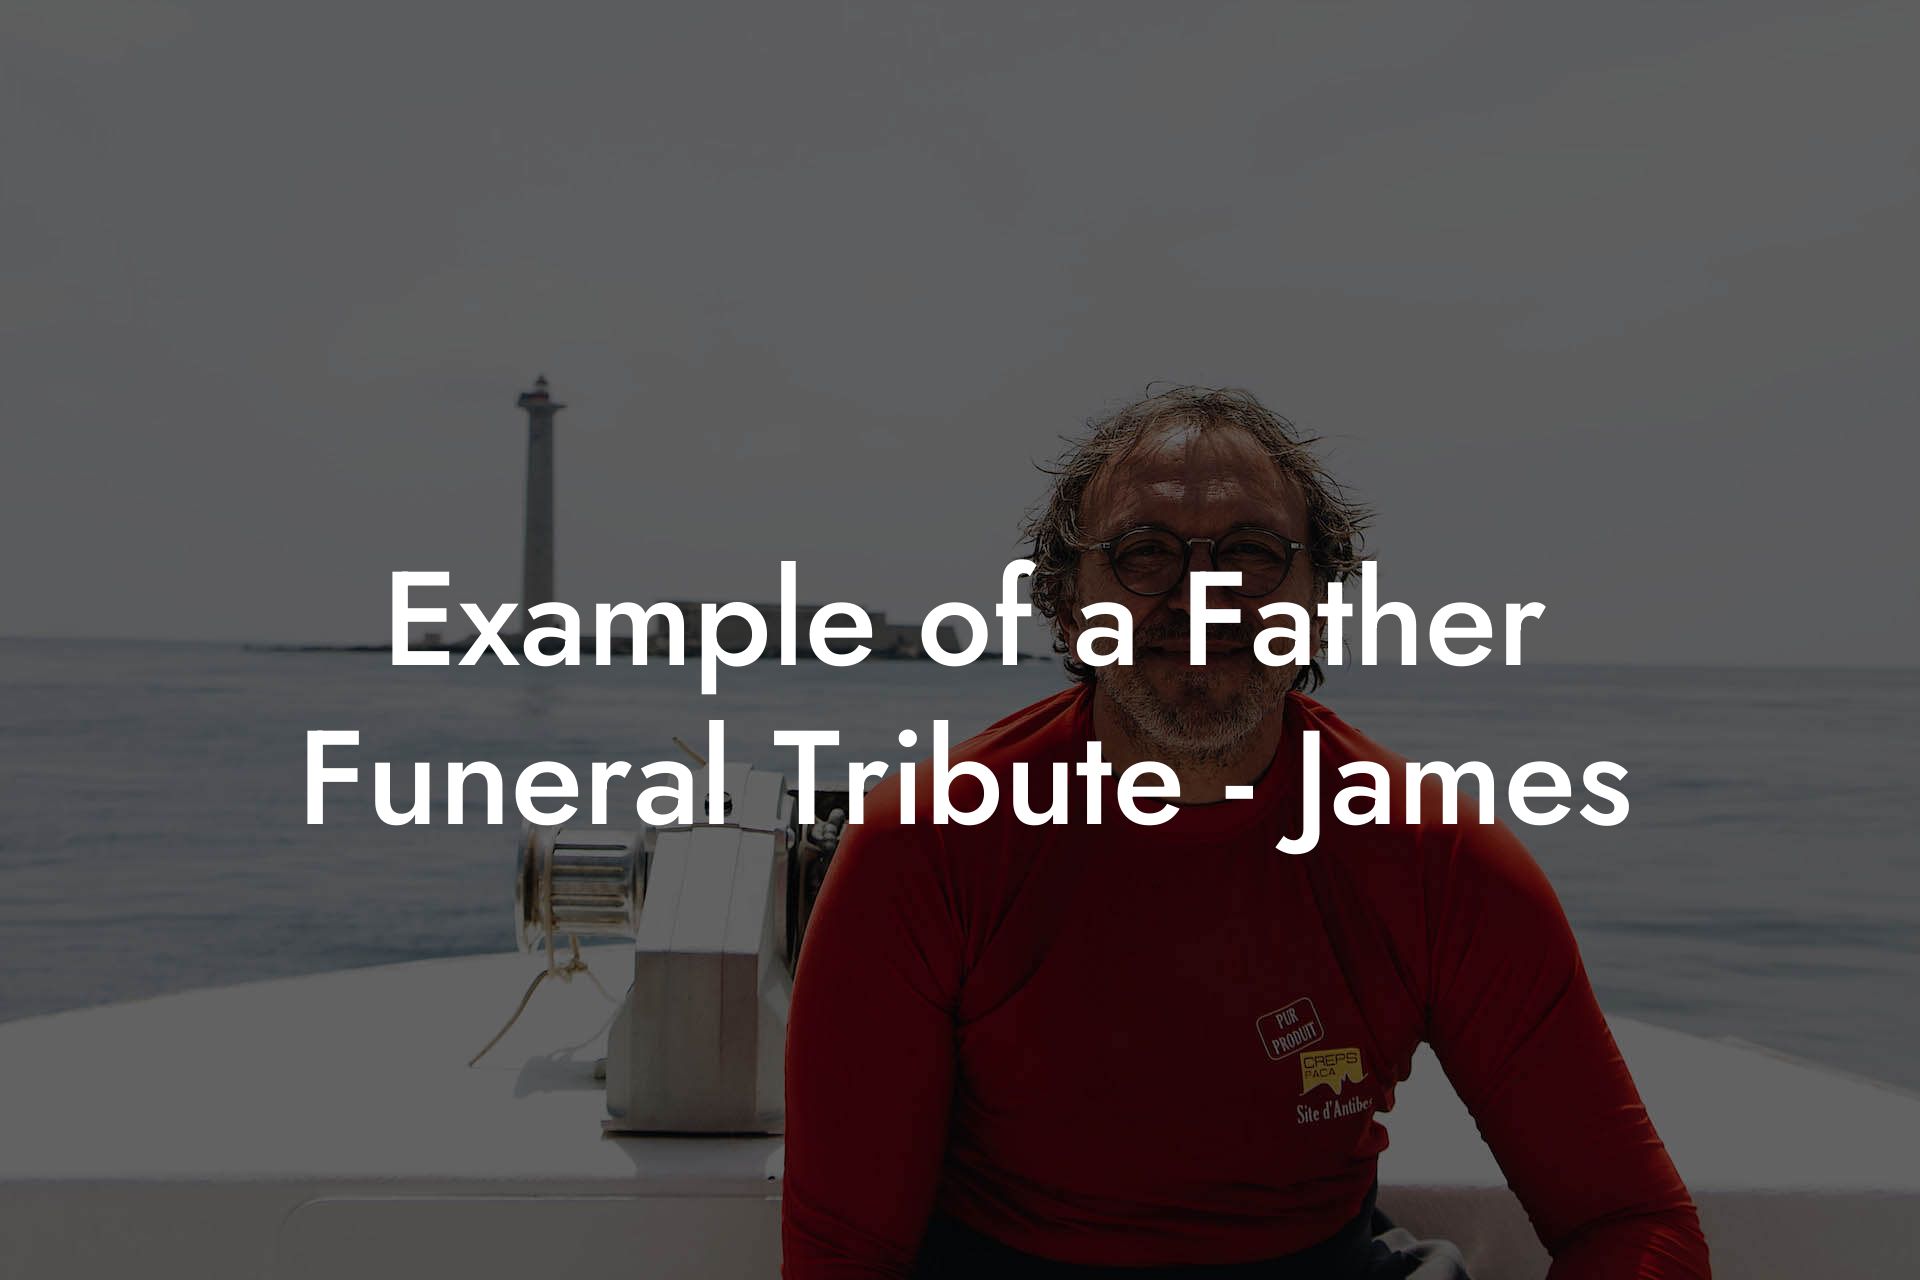 Example of a Father Funeral Tribute - James